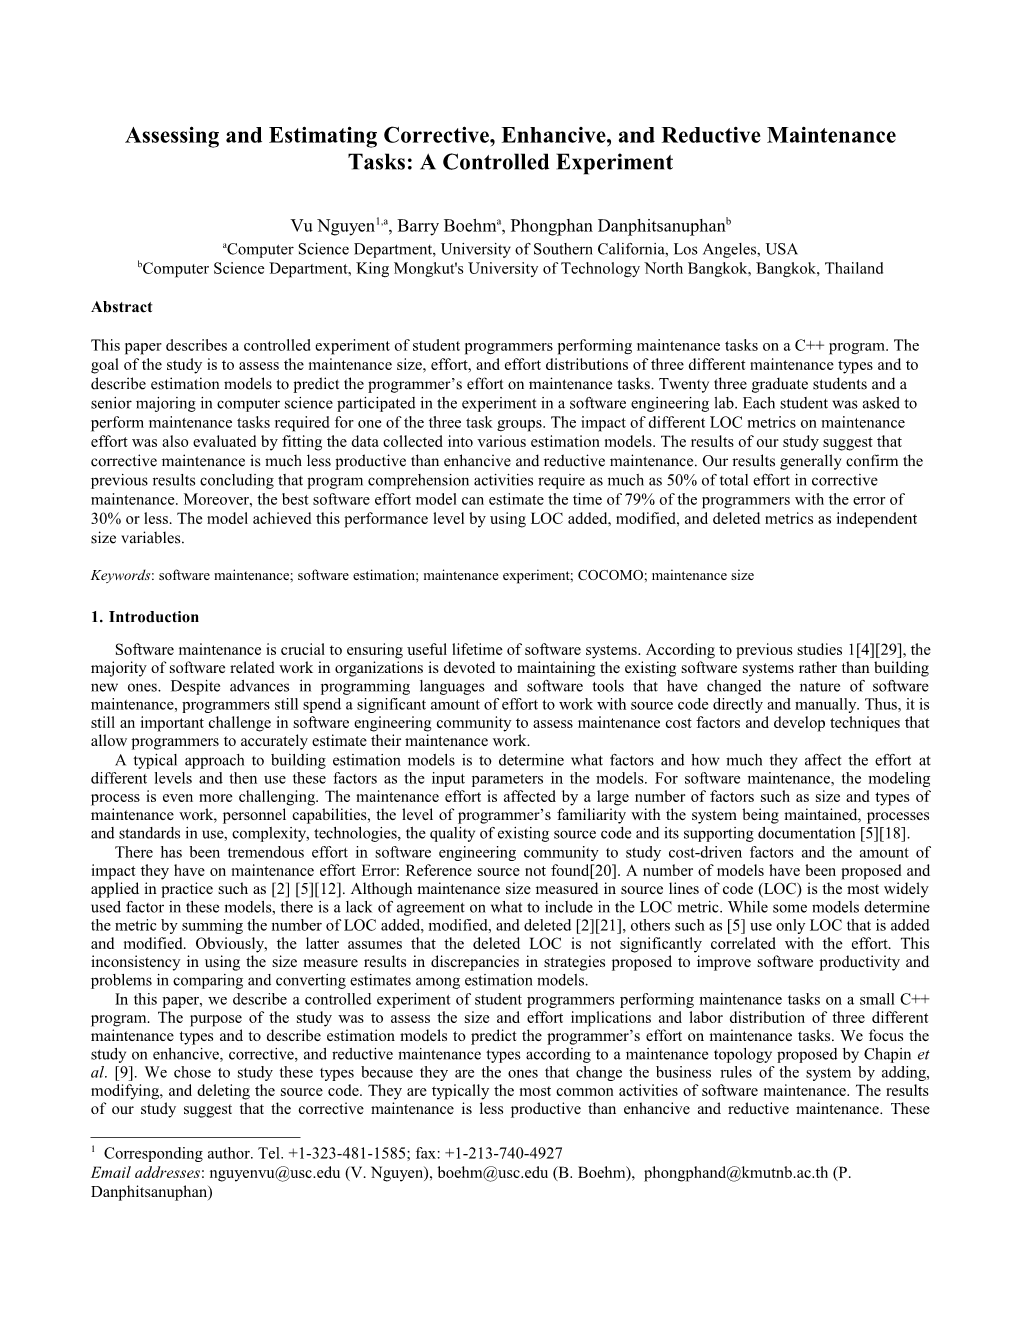 Assessing and Estimating Corrective, Enhancive, and Reductive Maintenance Tasks: a Controlled